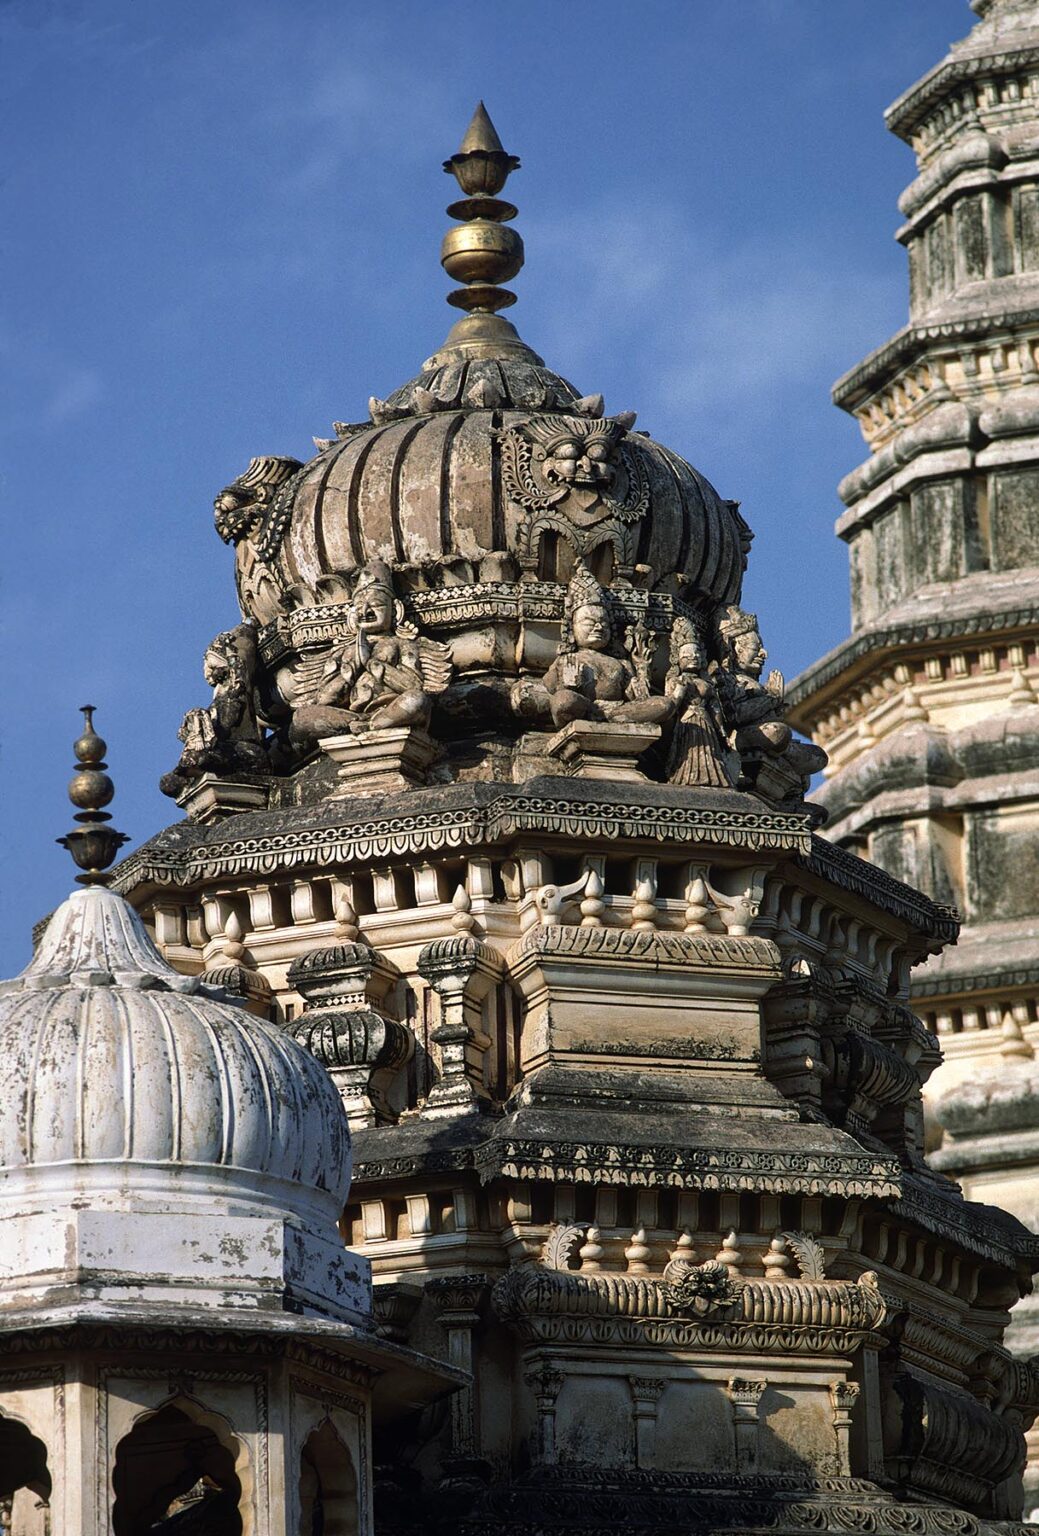 STONE STATUES on the roof DOMES of RANGJI'S OLD TEMPLE, built in 1823 in the city of PUSHKAR - RAJASTHAN, INDIA